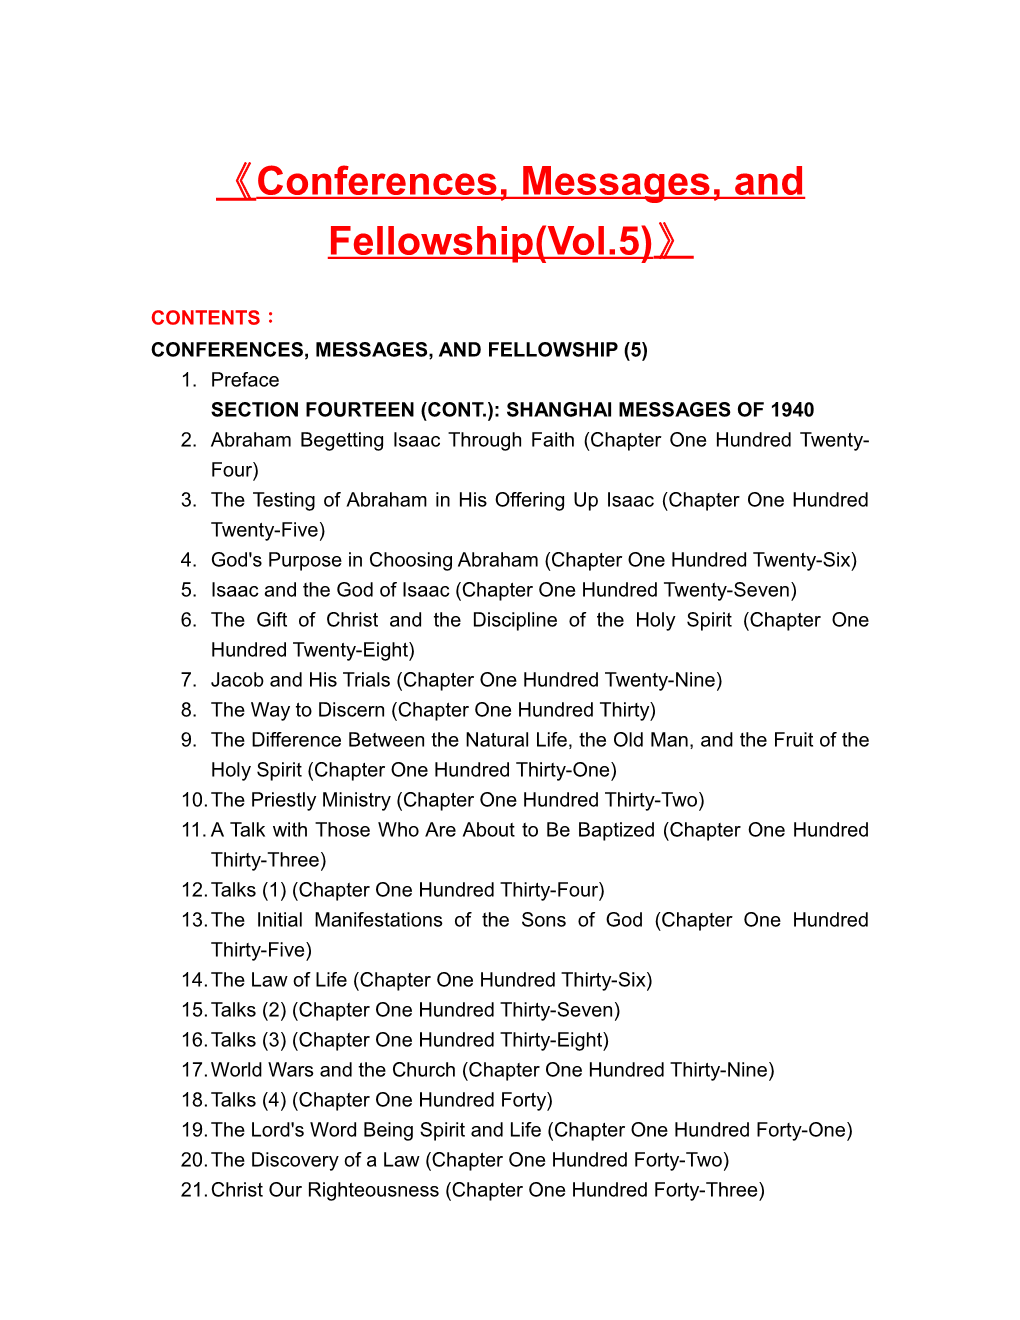 Conferences, Messages, and Fellowship(Vol.5)